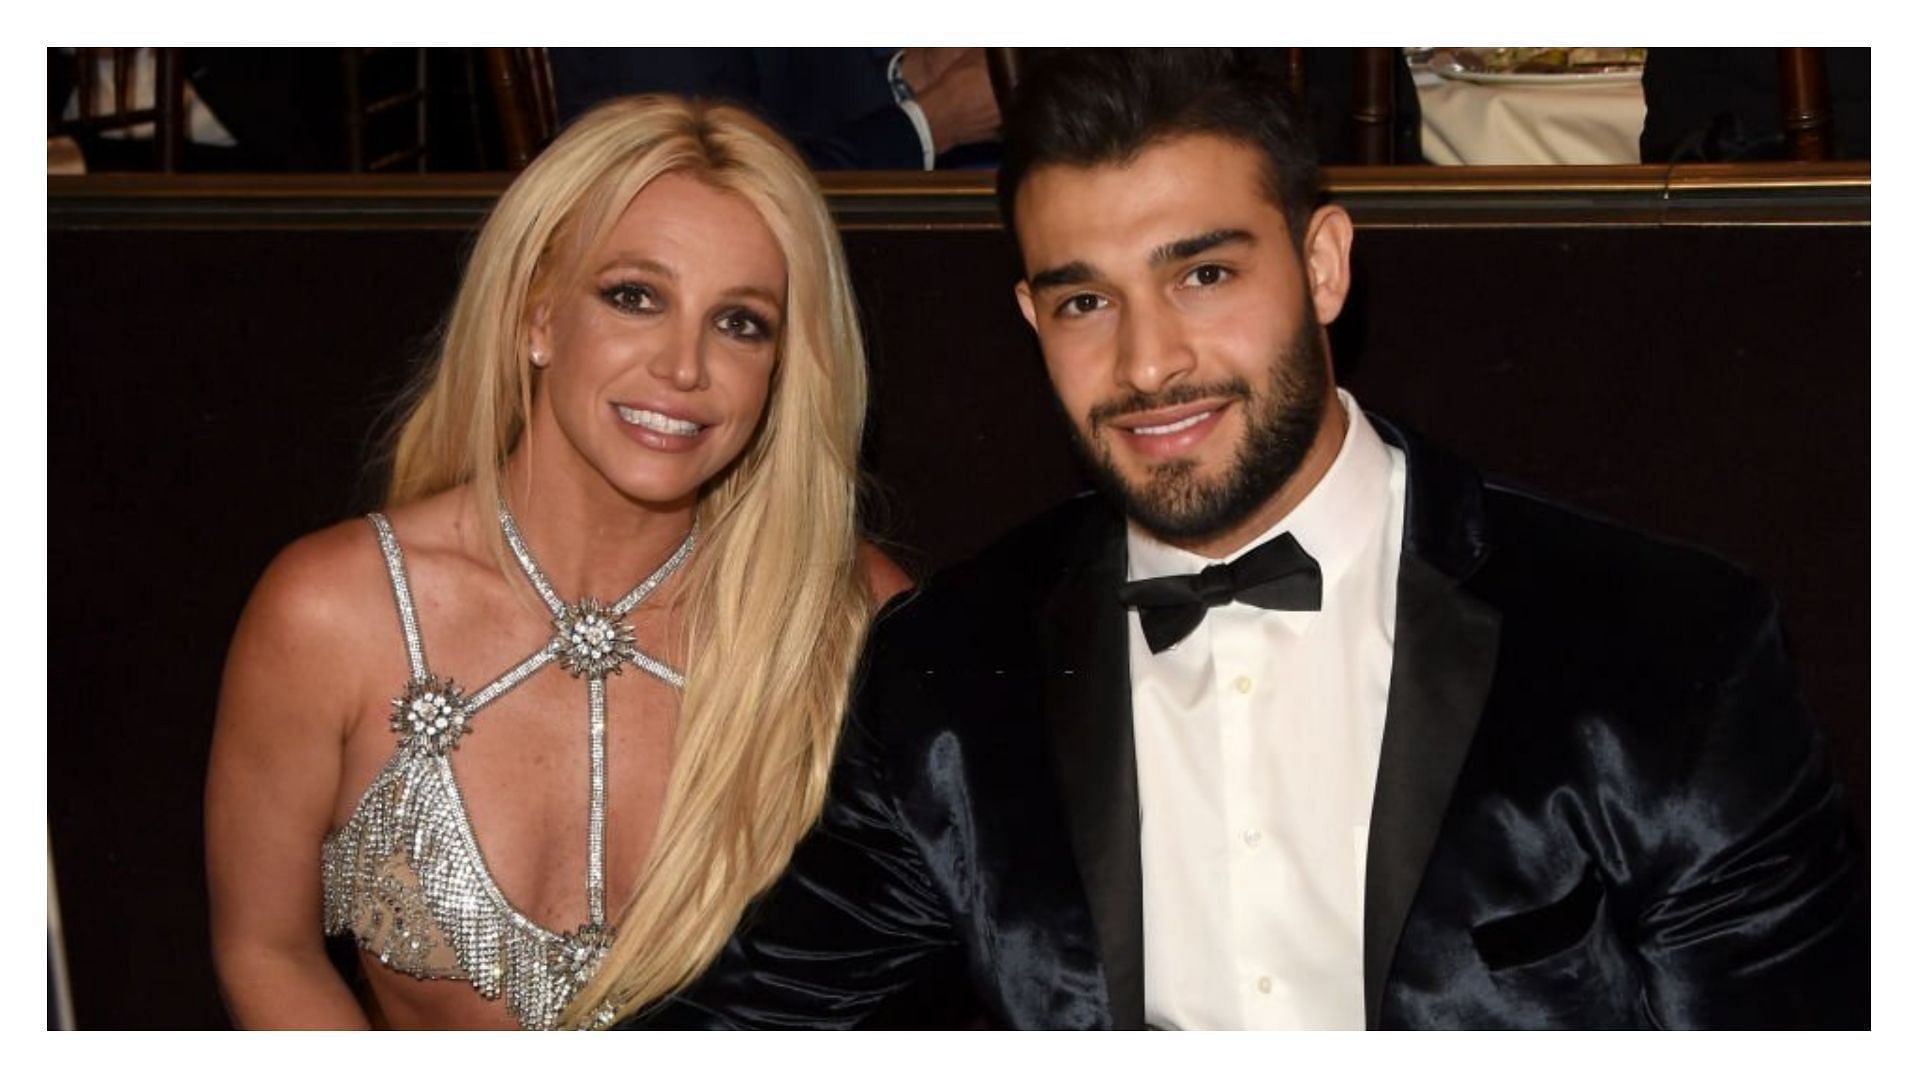 Britney Spears and Sam Asghari&#039;s wedding was attended by some well-known faces (Image via J. Merritt/Getty Images)